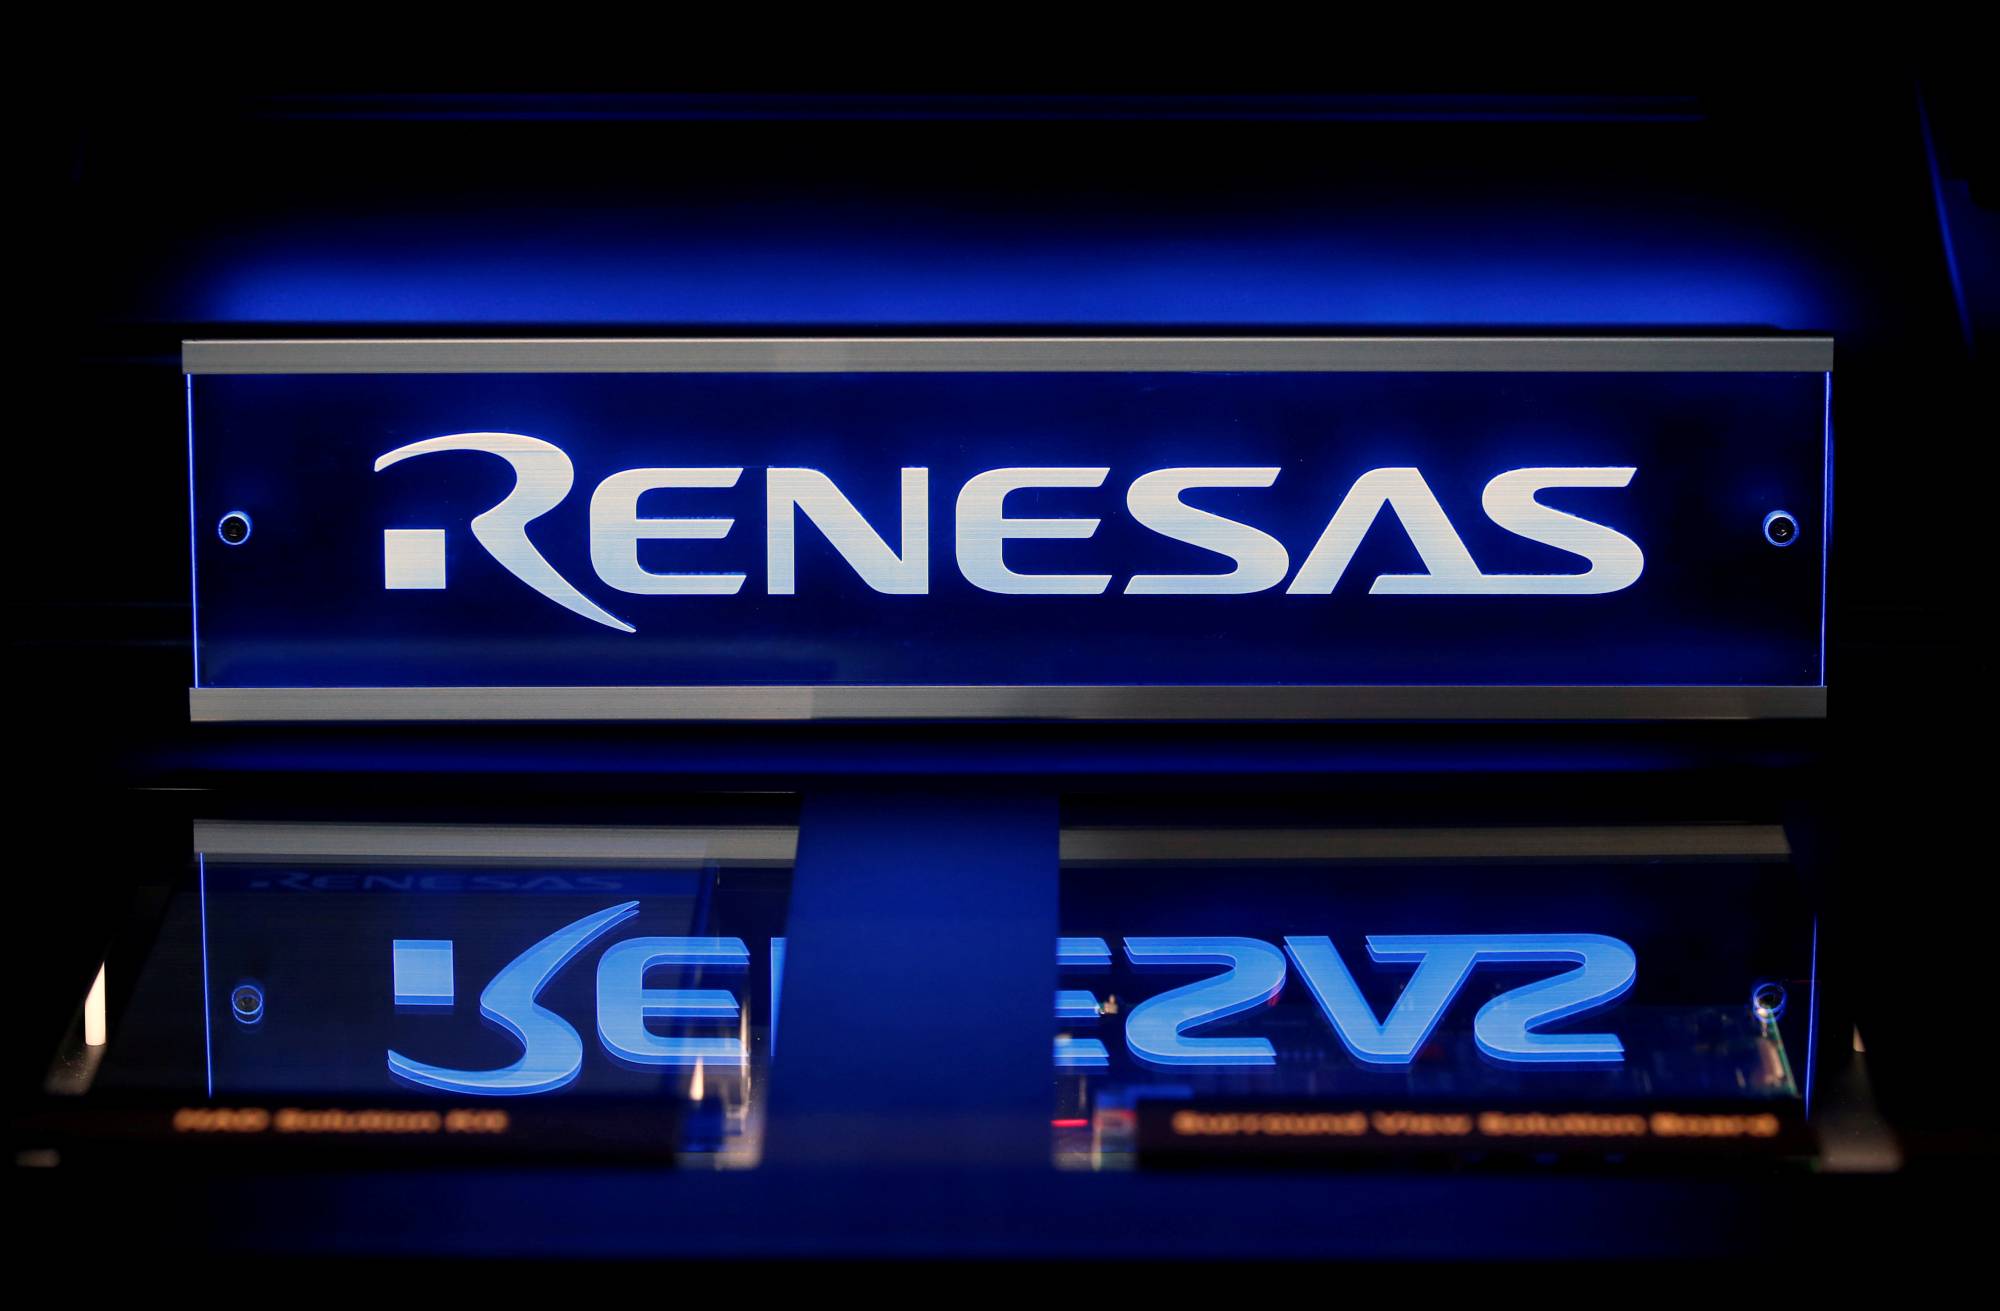 Renesas was the second-largest provider of microcontrollers — chip products installed in vehicles to control power units and other devices — in 2020 with a 17.0% global market share | REUTERS